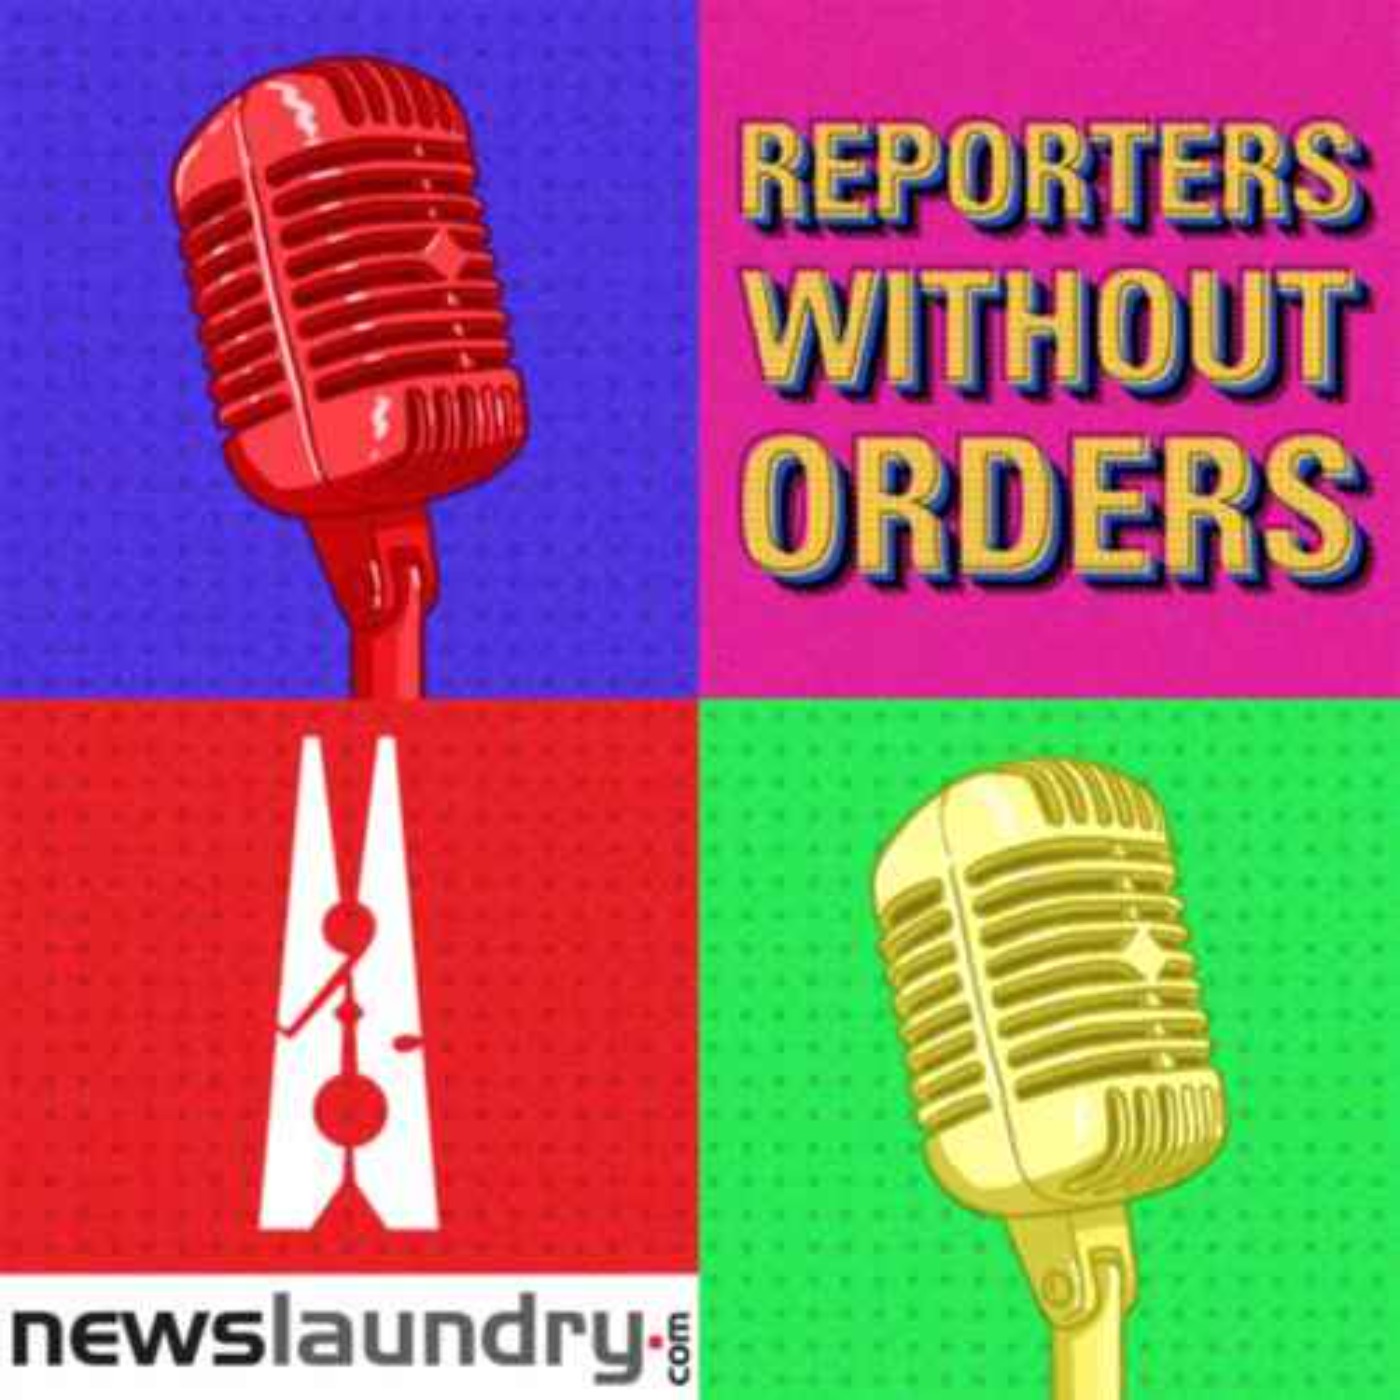 Reporters Without Orders Ep 193: BHU student missing for 1.5 years, crime in UP, UAPA in Tripura